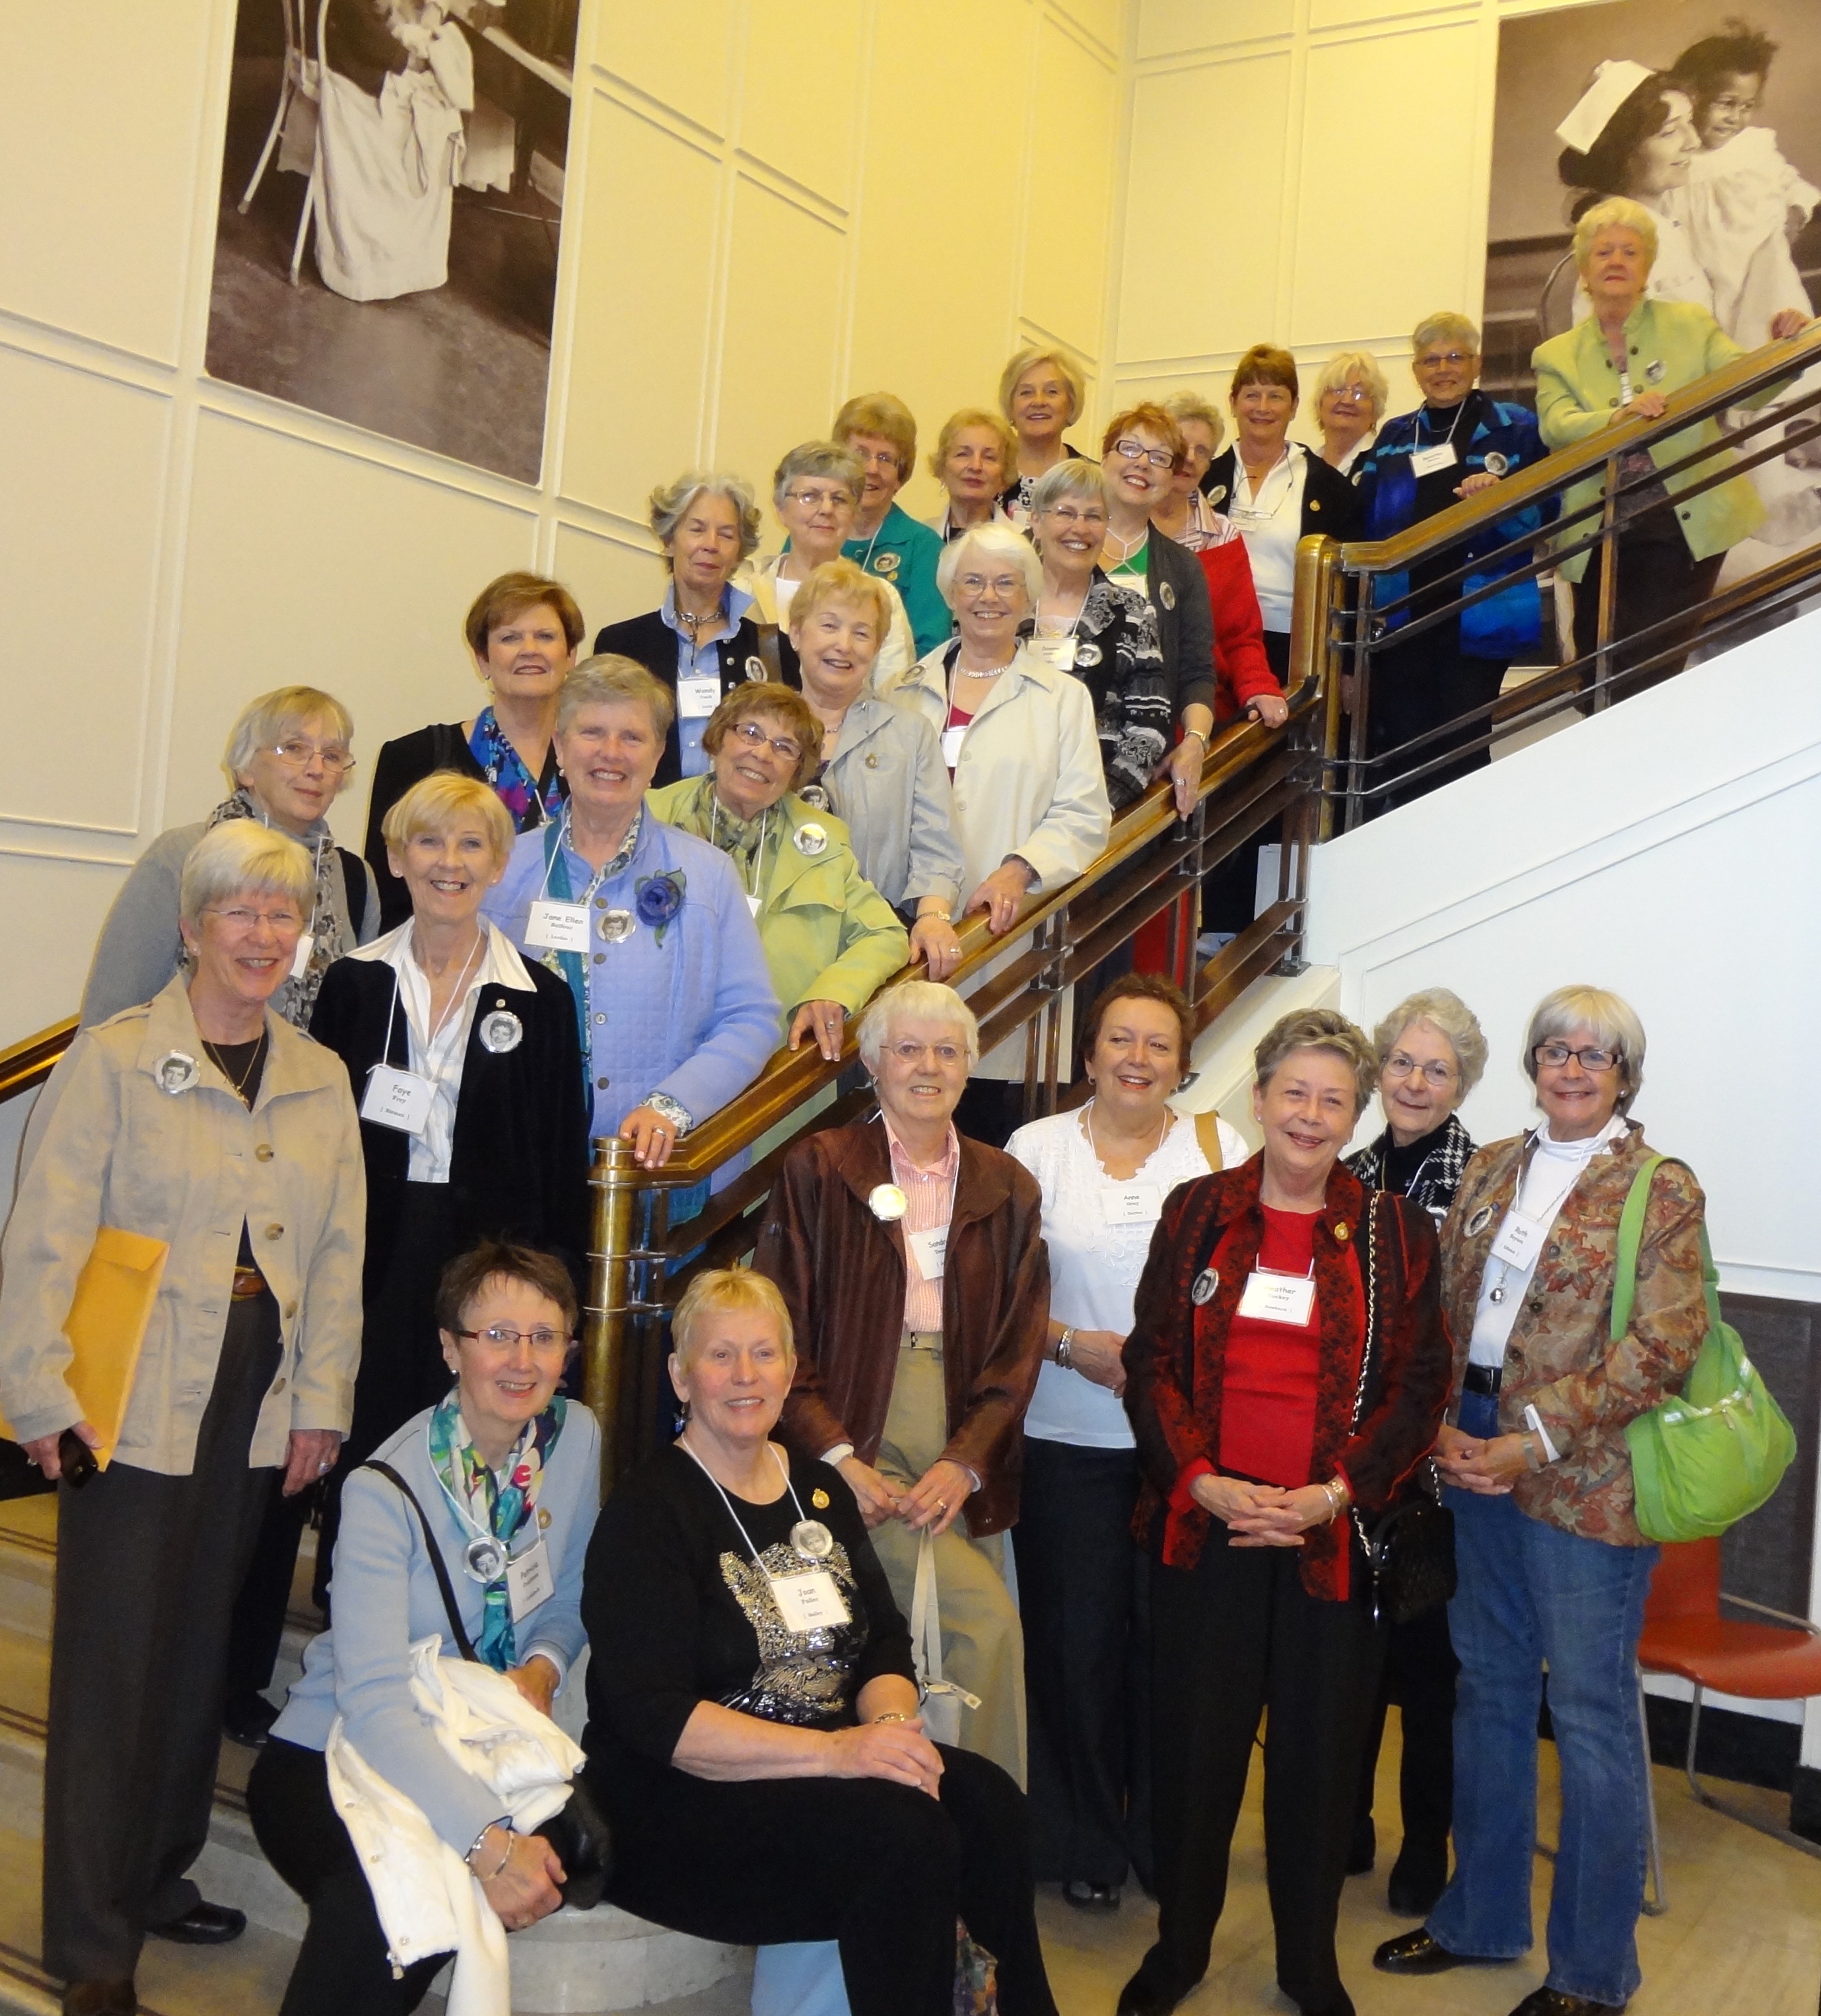 Congratulations to the Class of 1962 on their 50th